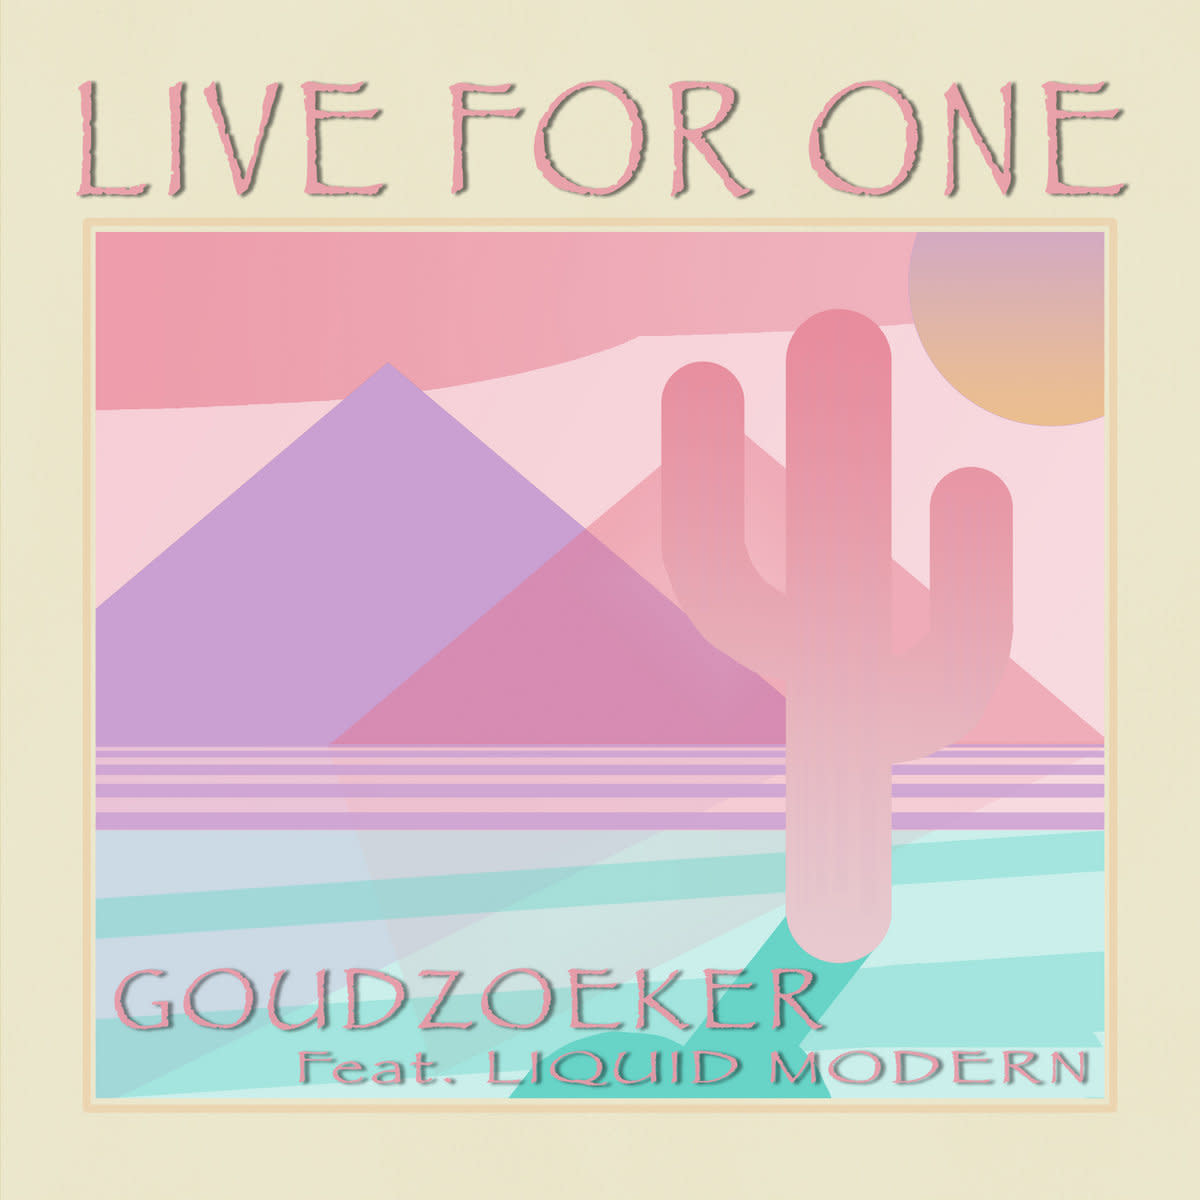 synth-single-review-live-for-one-by-goudzoeker-liquid-modern